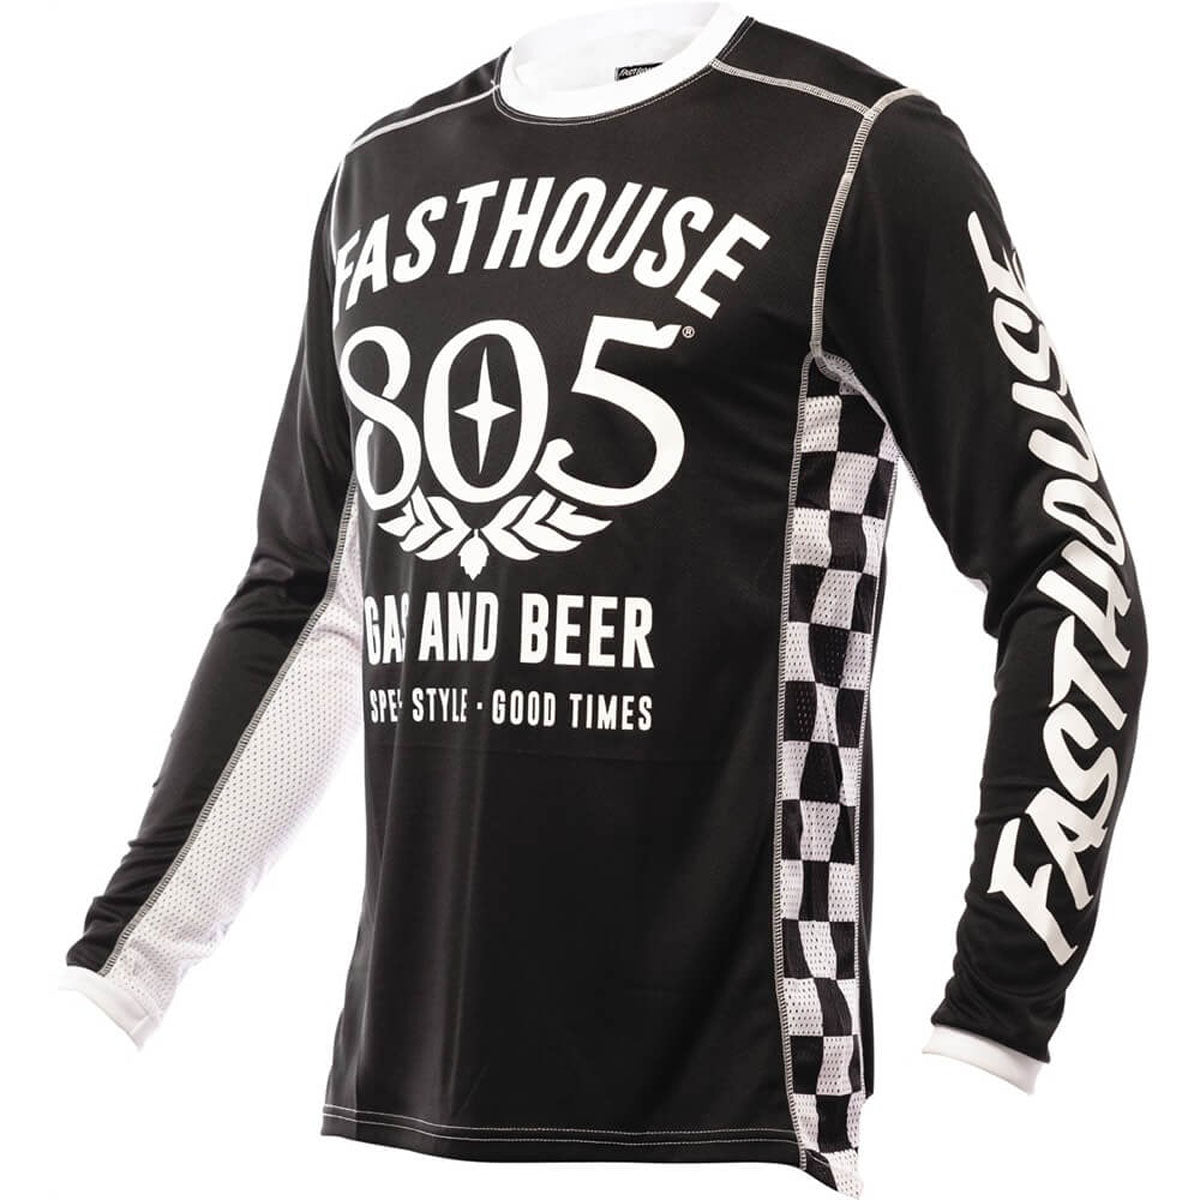 Fasthouse Grindhouse 805 Jersey - ExtremeSupply.com